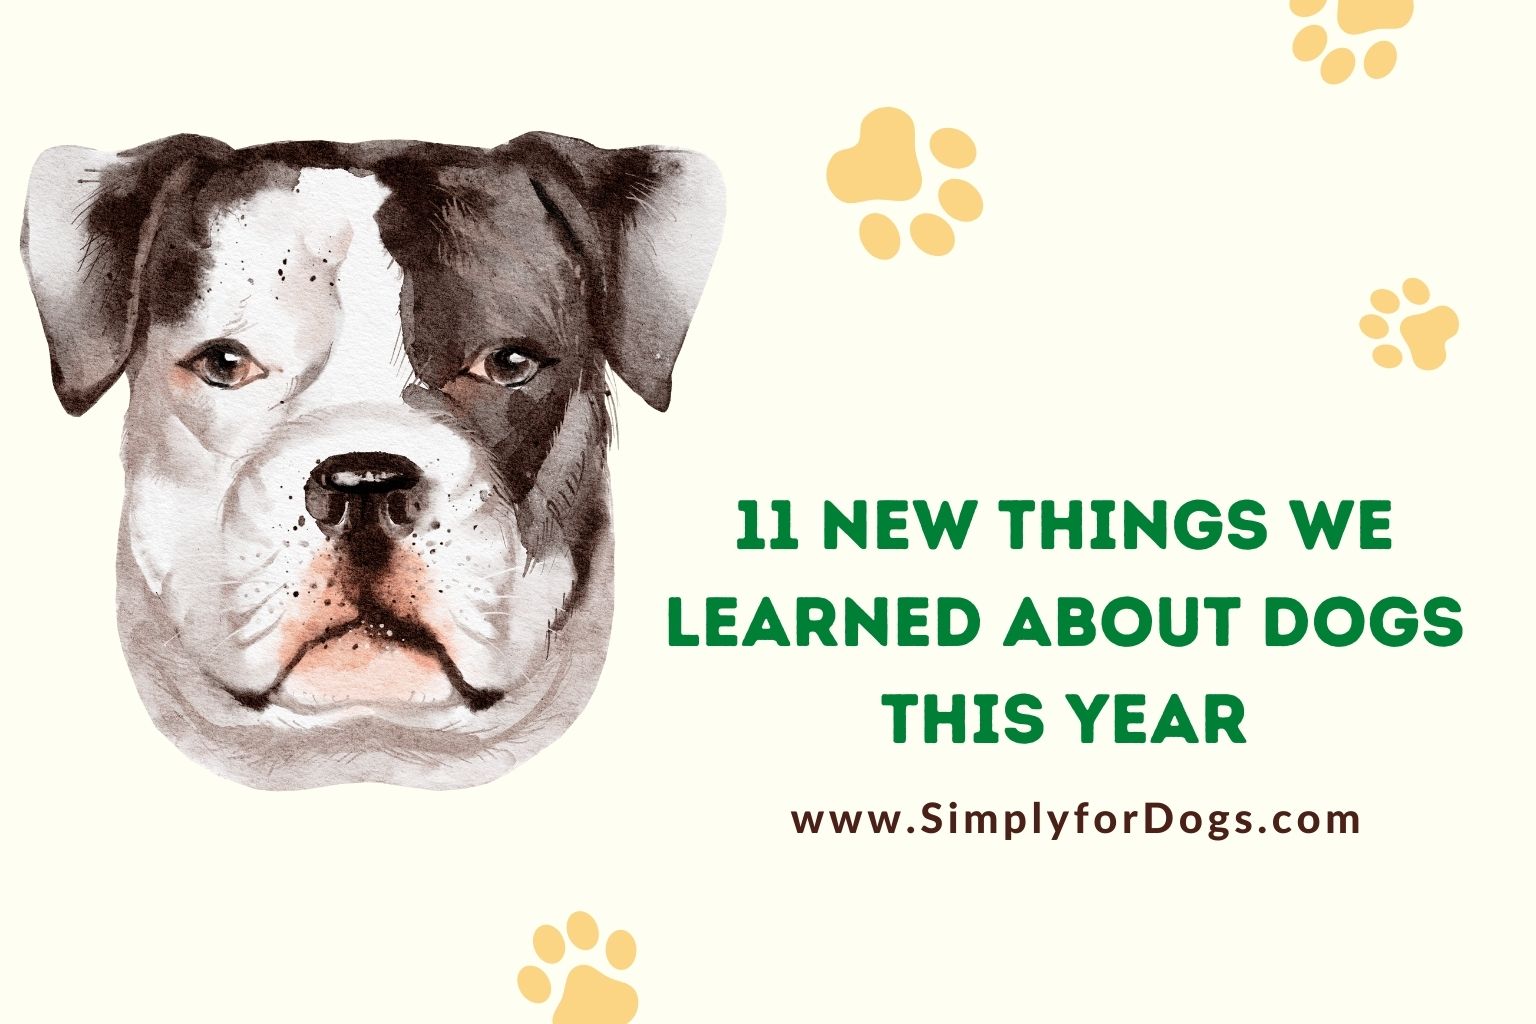 11 New Things We Learned About Dogs This Year